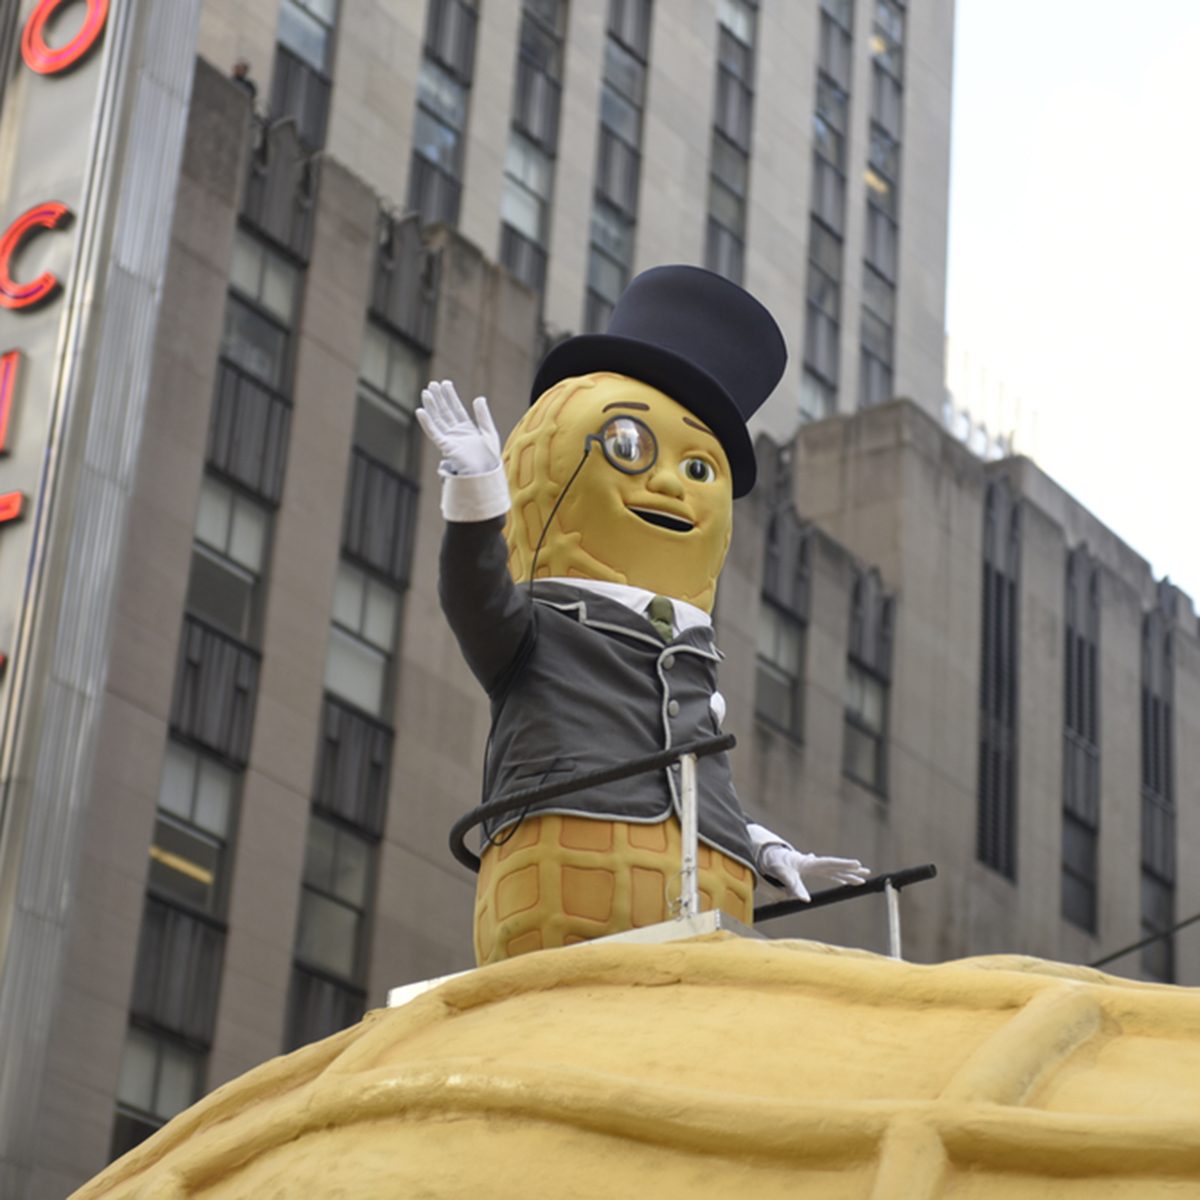 Who's your favorite food mascot: Mr. Peanut or Chester Cheetah?